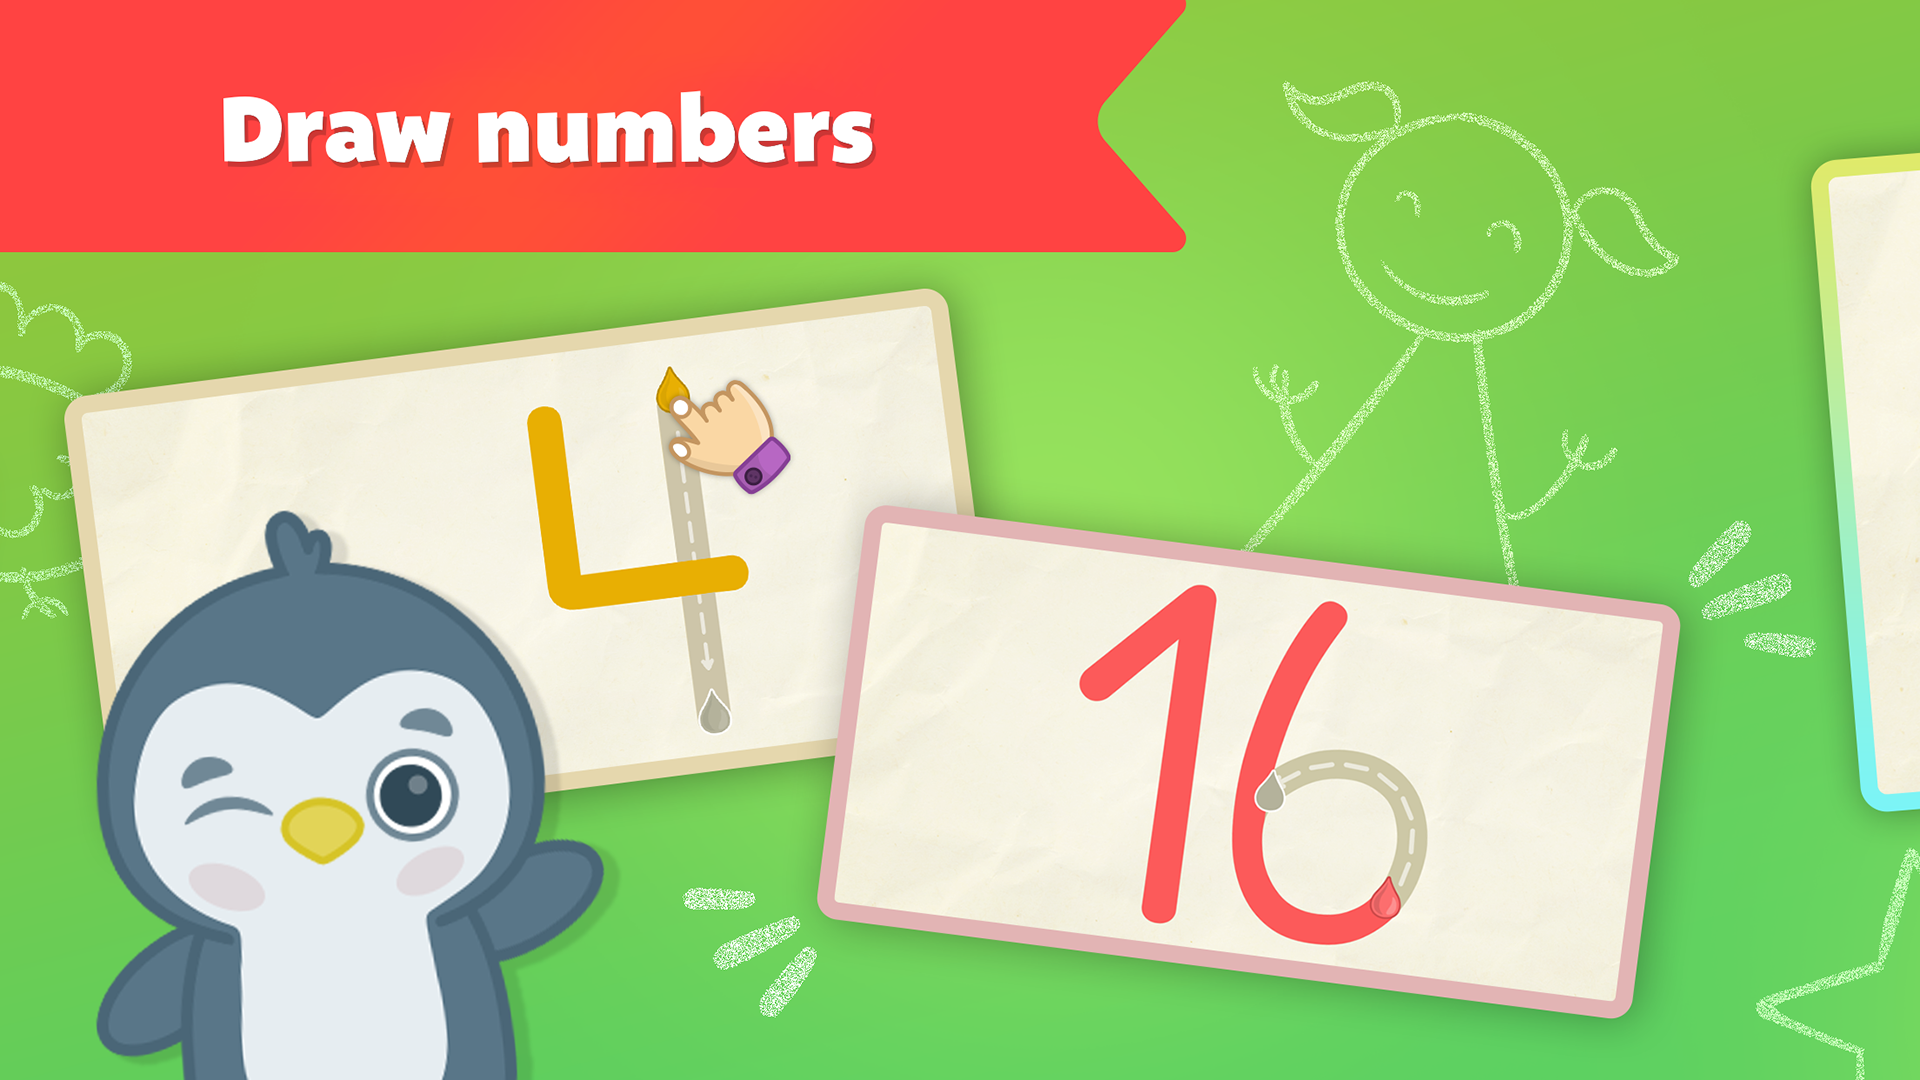 Download & Play 123 Numbers - Count & Tracing on PC & Mac (Emulator)